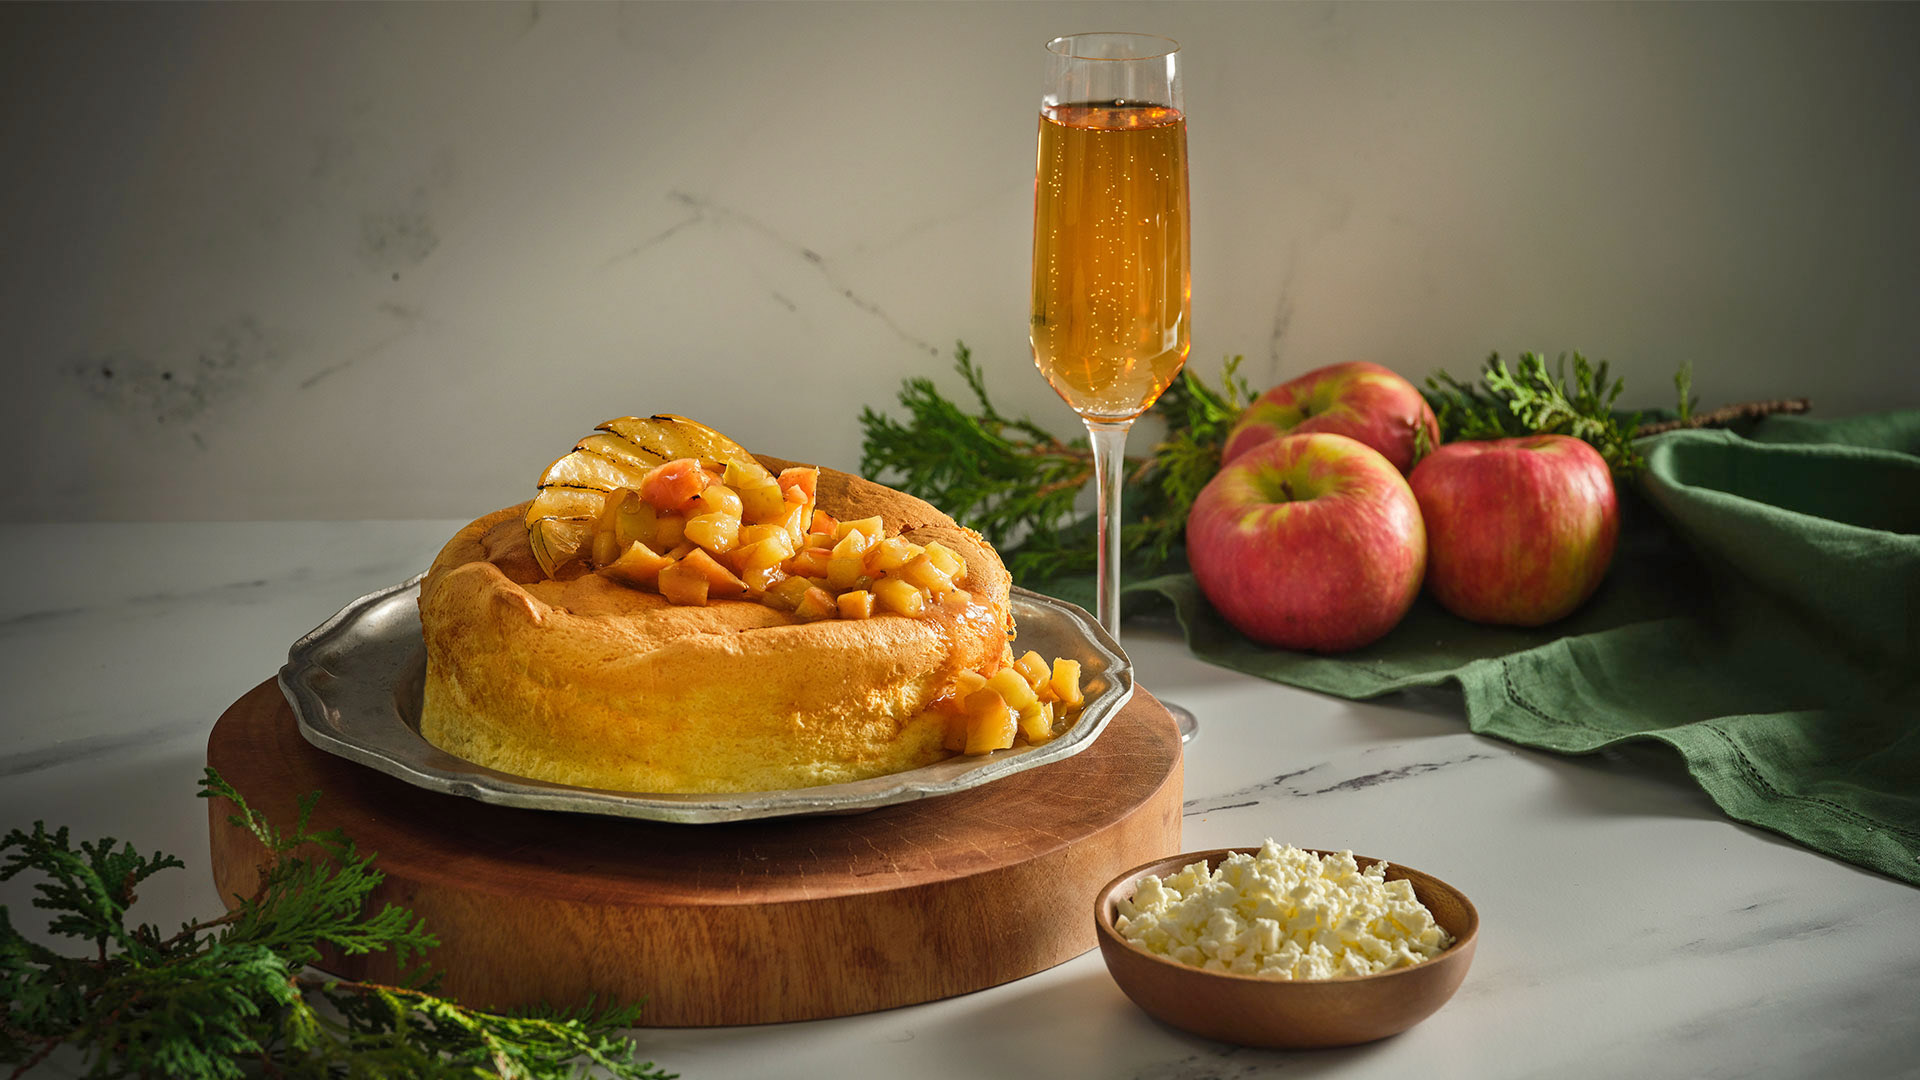 A Feta Cheesecake with Apple Compote on a round silver platter on top of a round wooden serving board next to a tall glass of wine next to 3 apples and a green napkin.